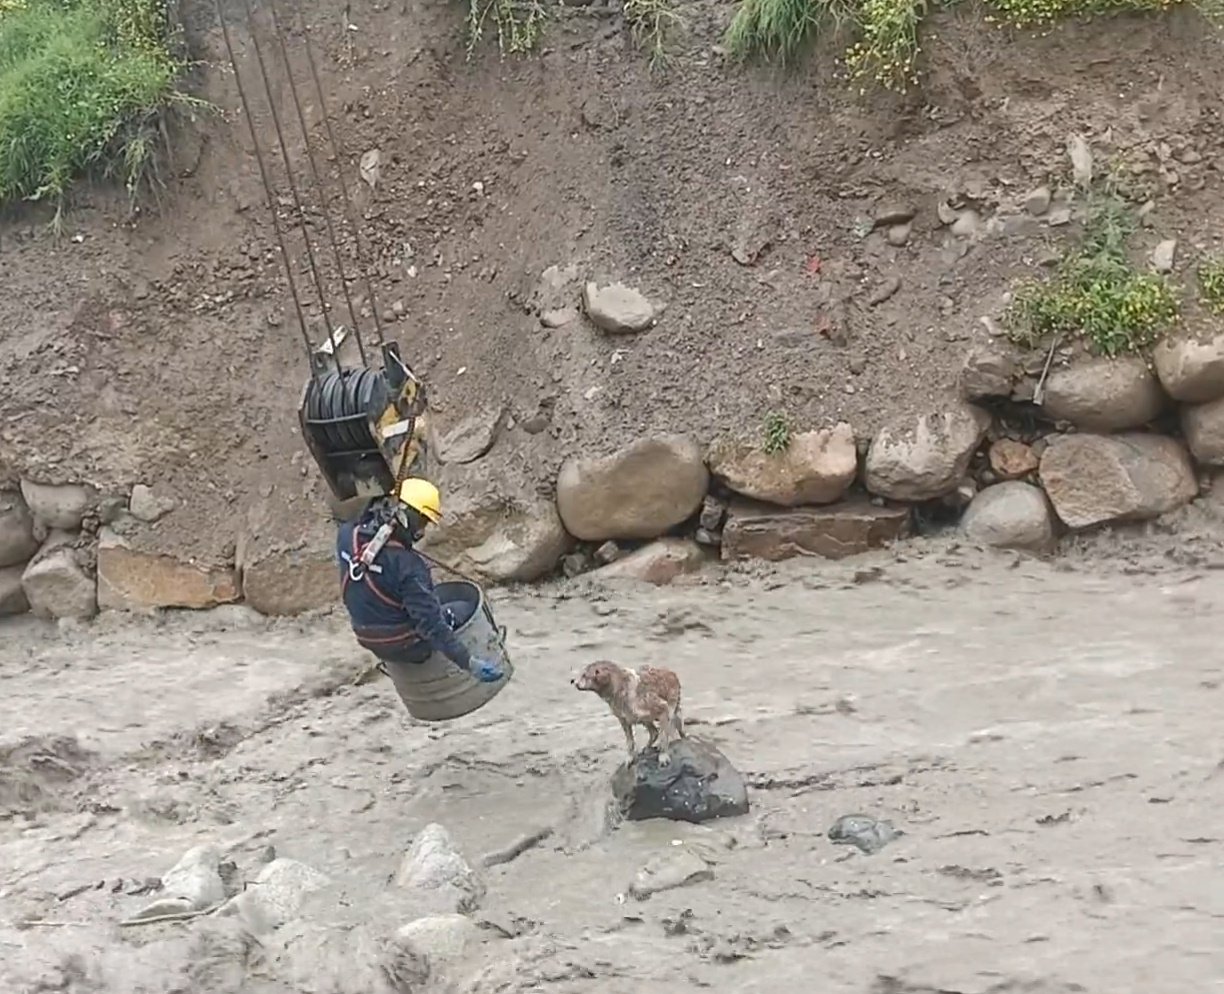 workers rescuing dog from a river